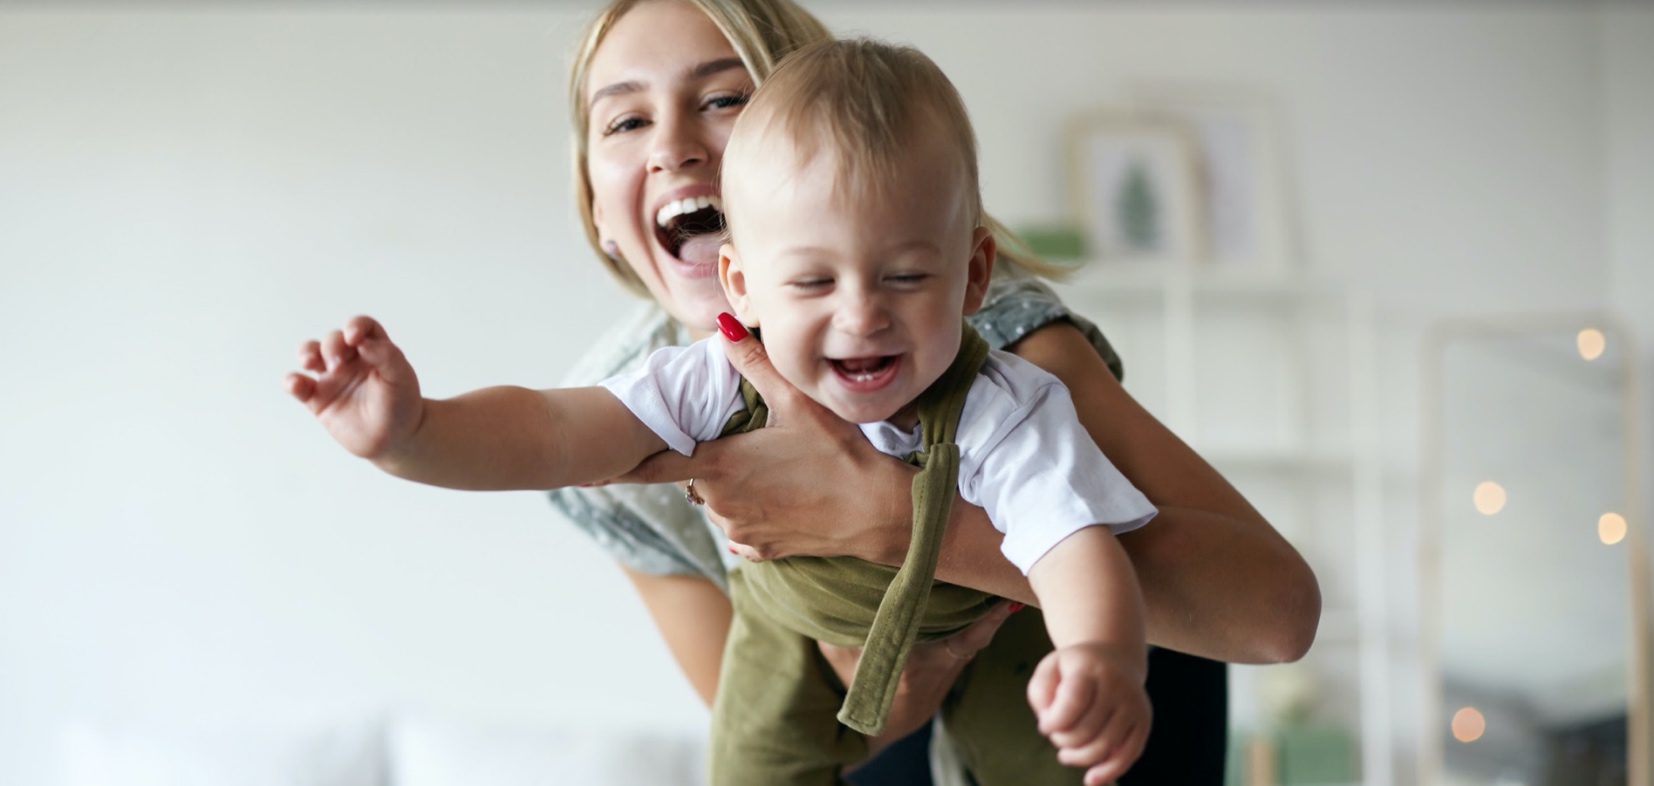 A woman holding a laughing toddler